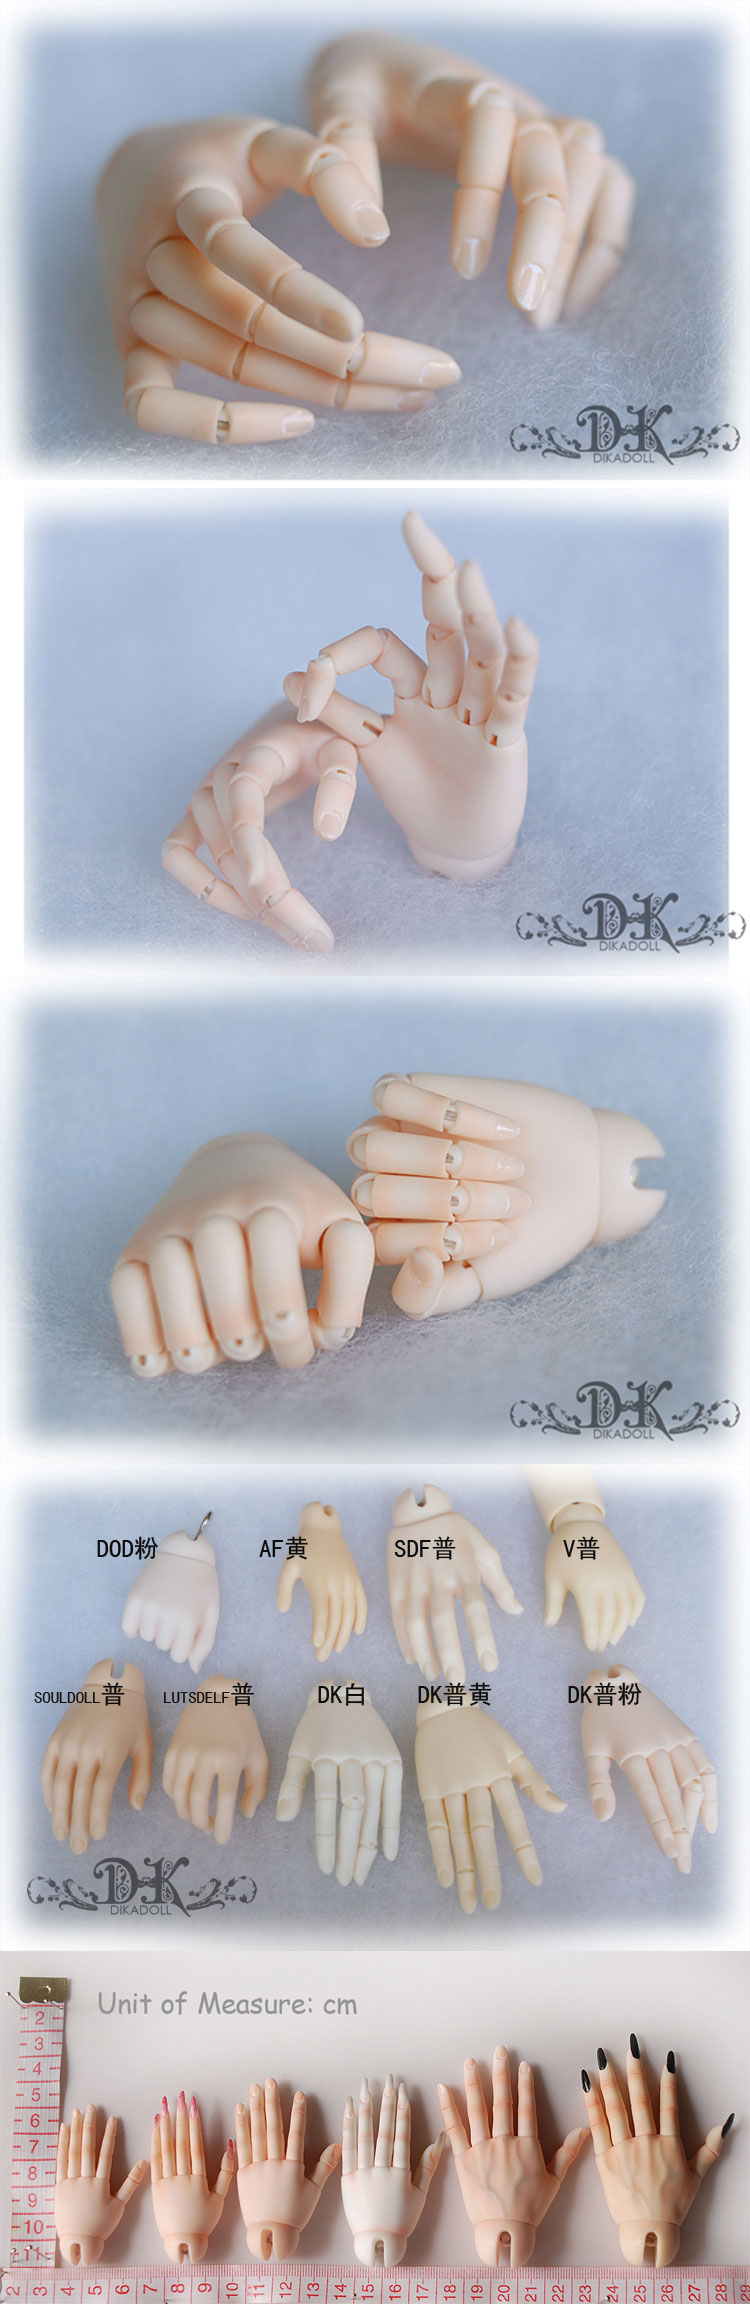 Ball-jointed Hand for SD BJD (Ball-jointed doll)